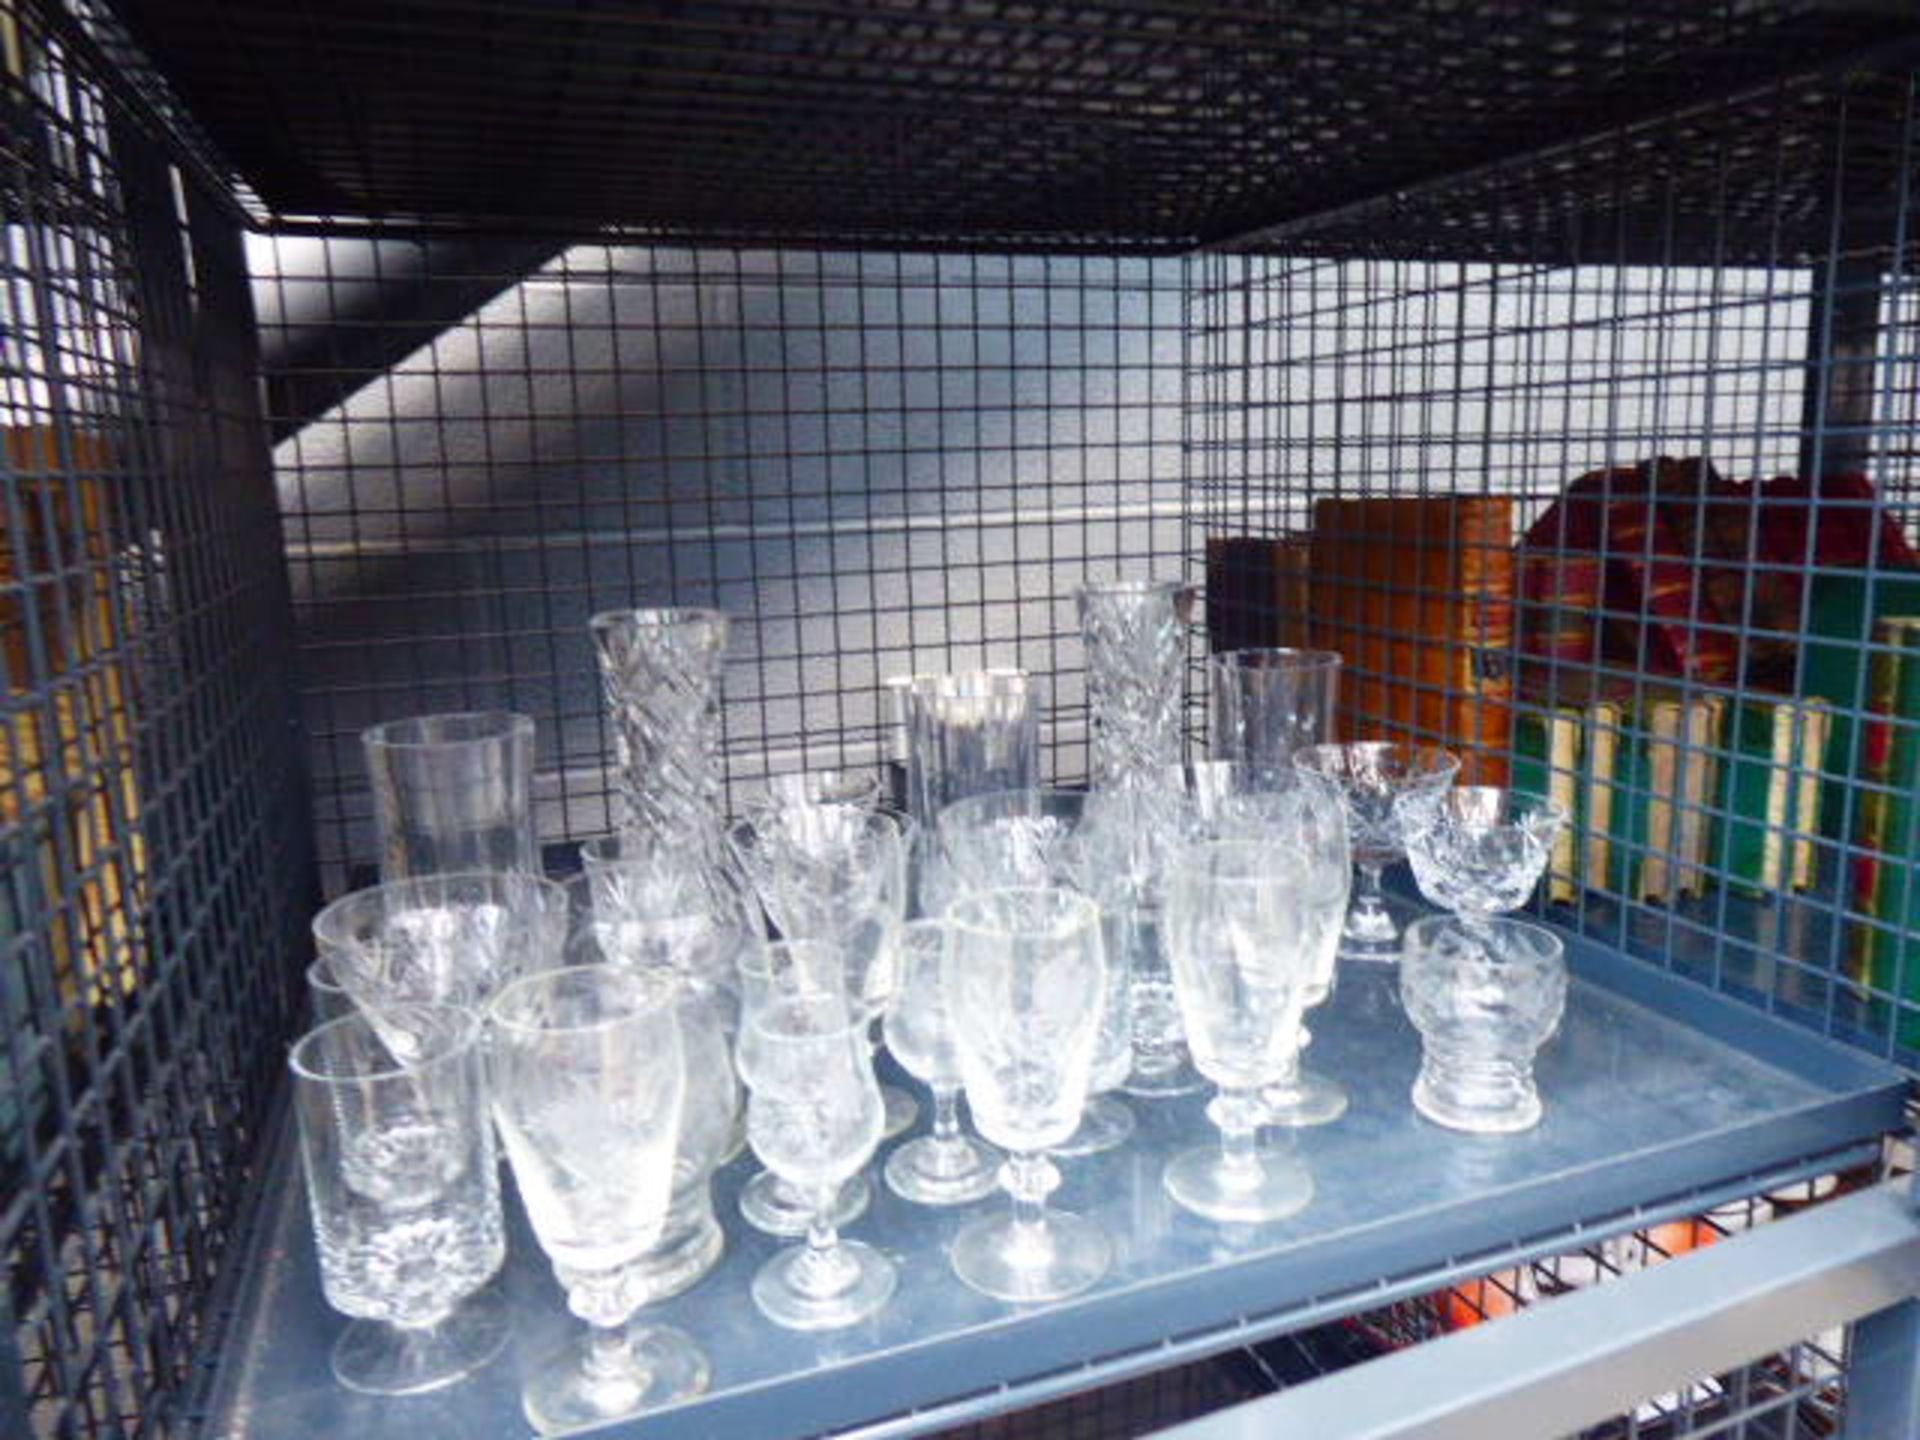 Cage containing a qty of sherry and wine glasses, plus vases